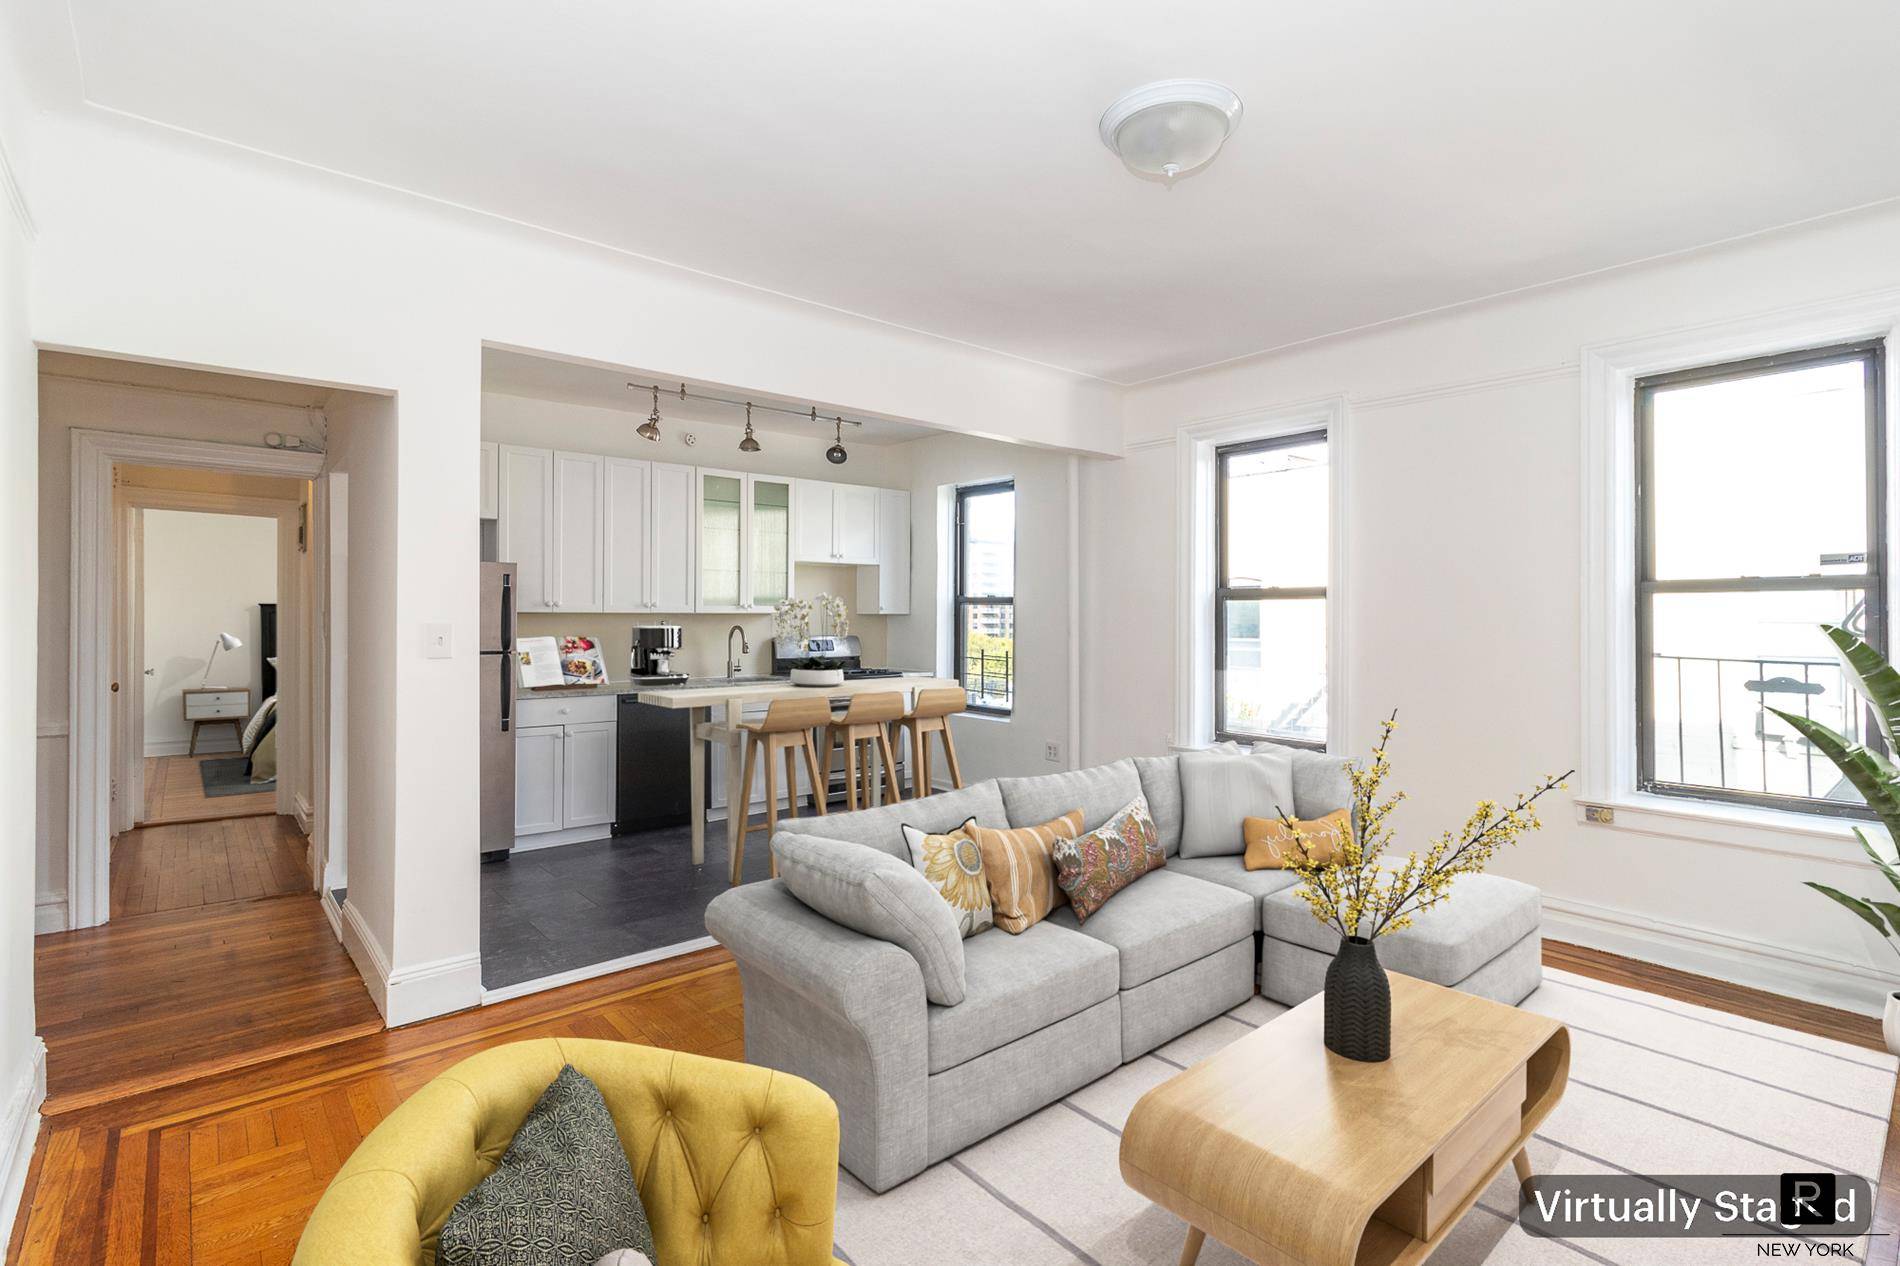 First time on the market in over a decade, welcome home to this sunny and airy top floor apartment located in the heart of beautiful Clinton Hill.